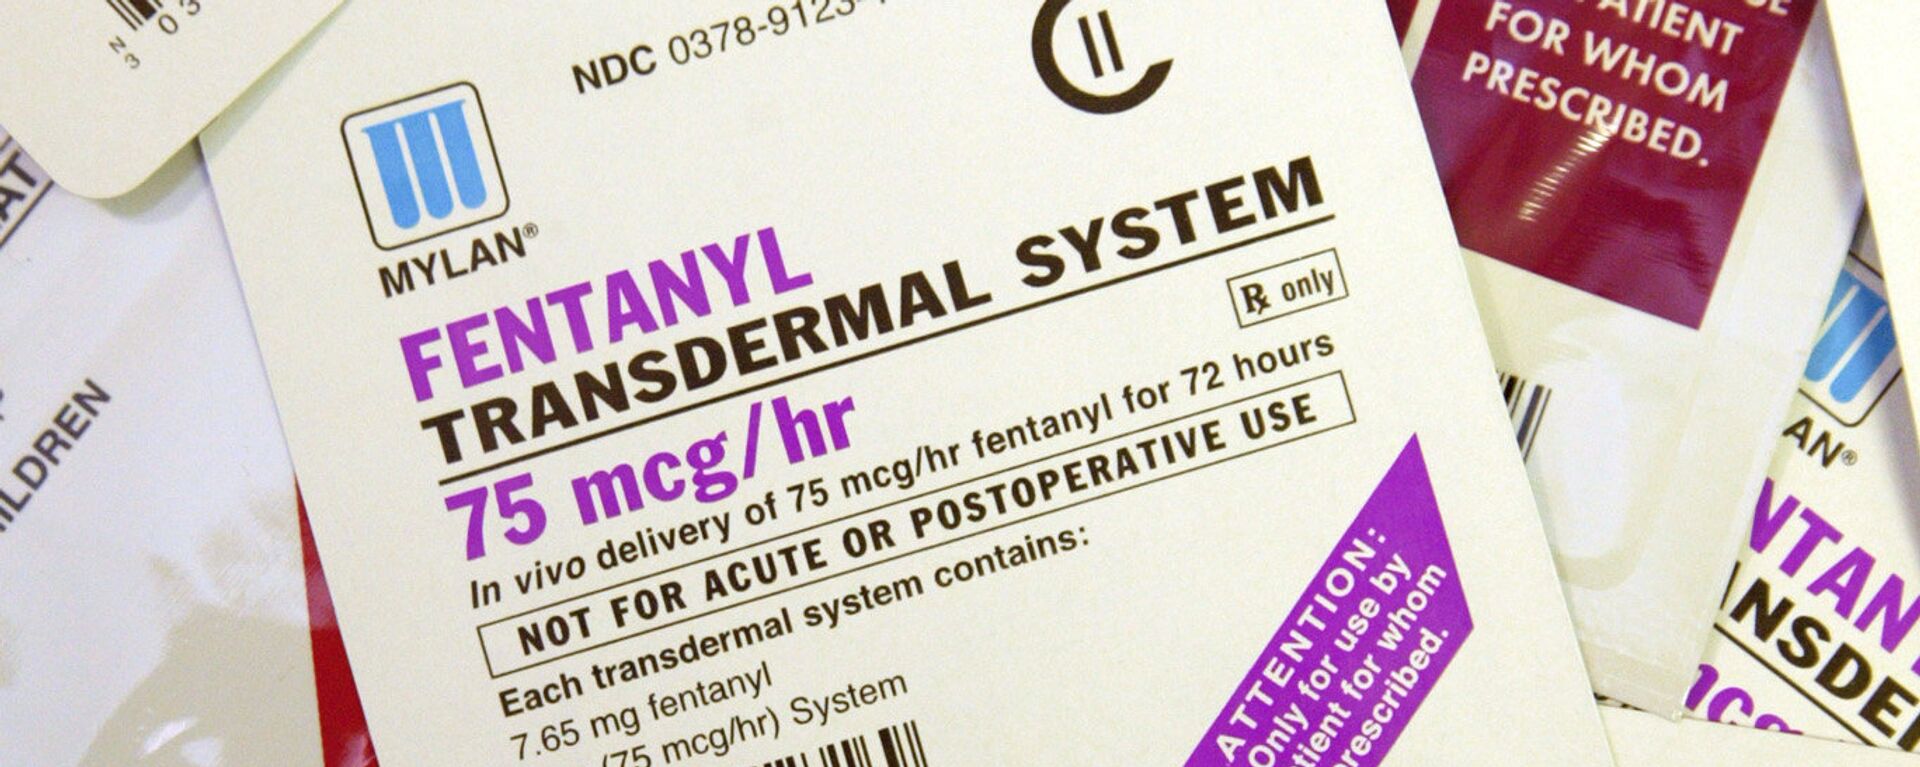 A collection of different brand and dosages of the Fentanyl patch, clearly marked wit warnings about non-precribed uses, Wednesday, April 26,2006 in St. Louis. - Sputnik International, 1920, 20.07.2022